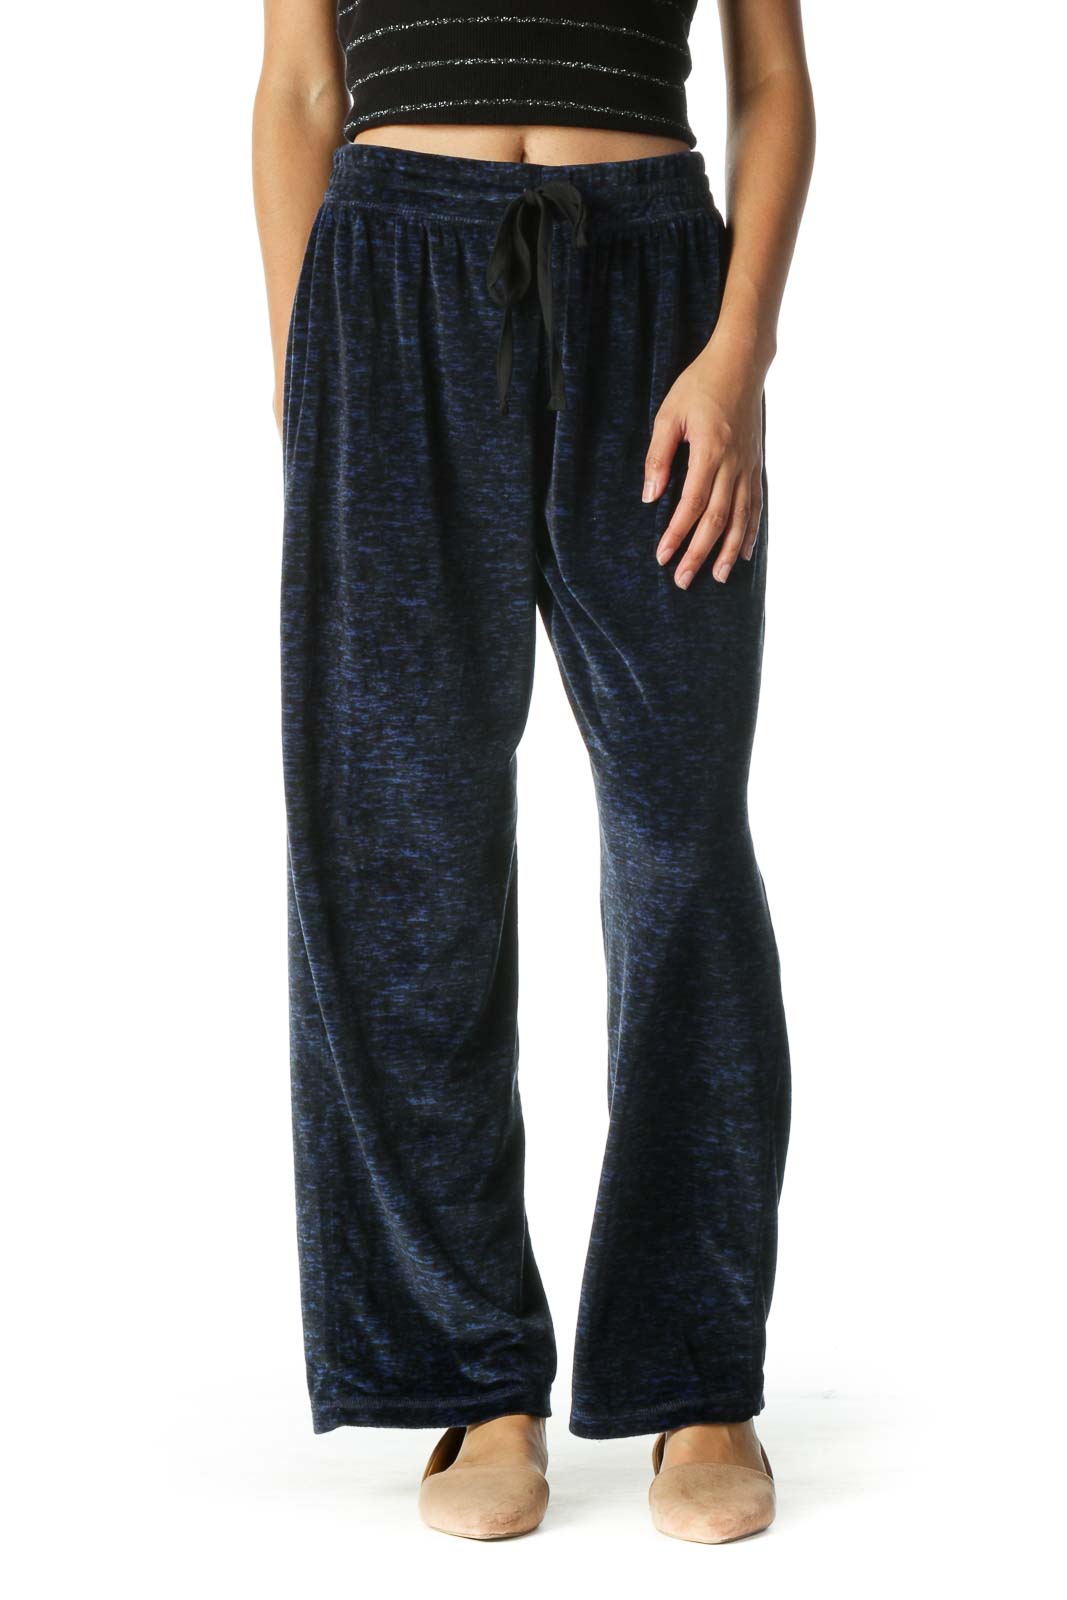 Black and Blue Print Sports Pants Front